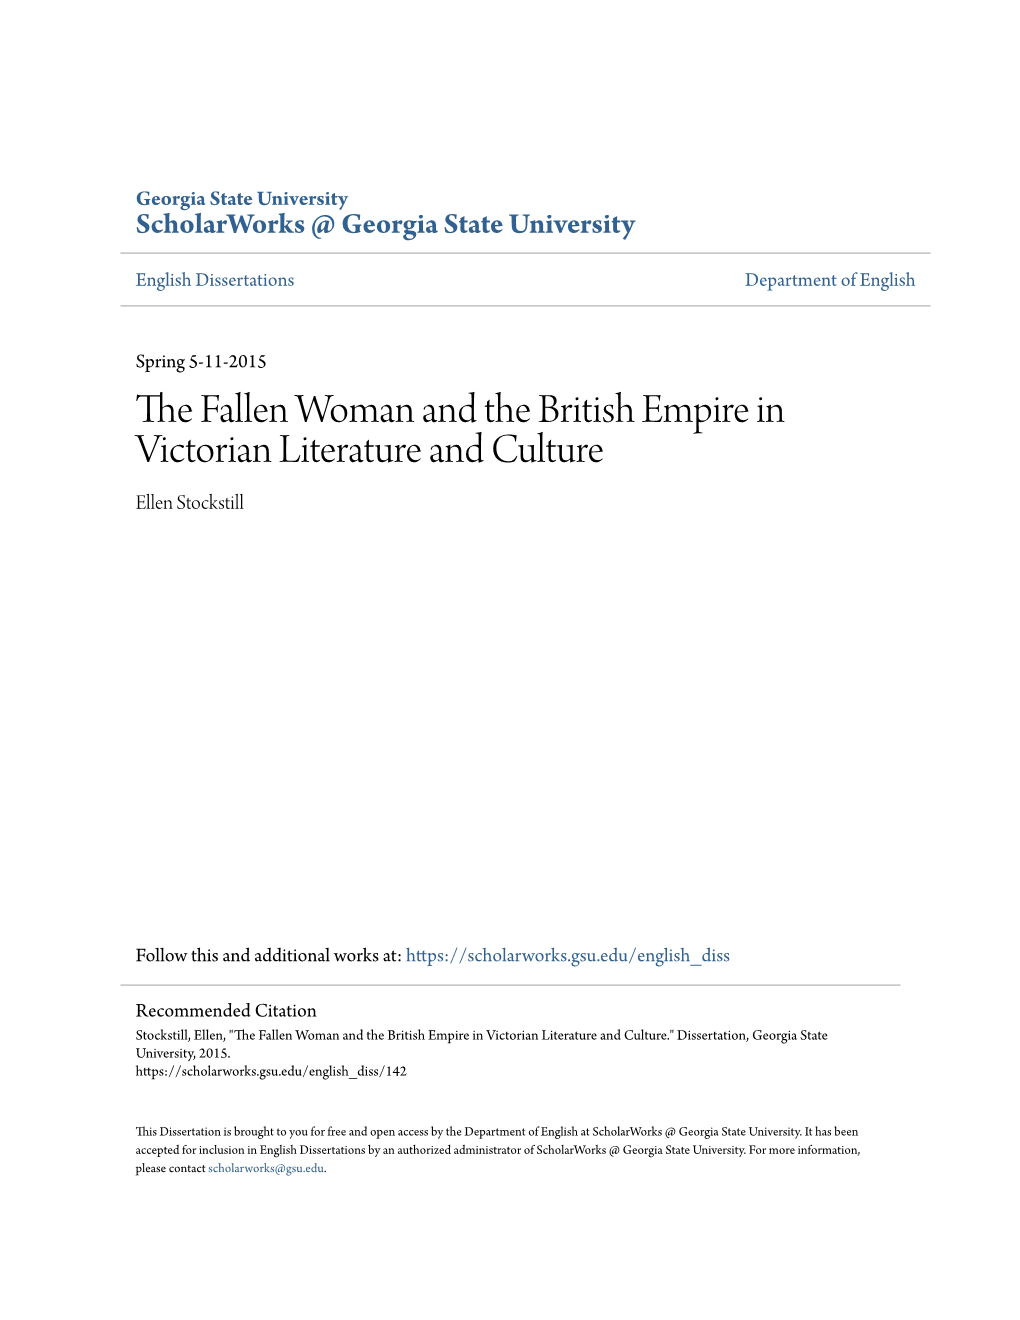 The Fallen Woman and the British Empire in Victorian Literature and Culture